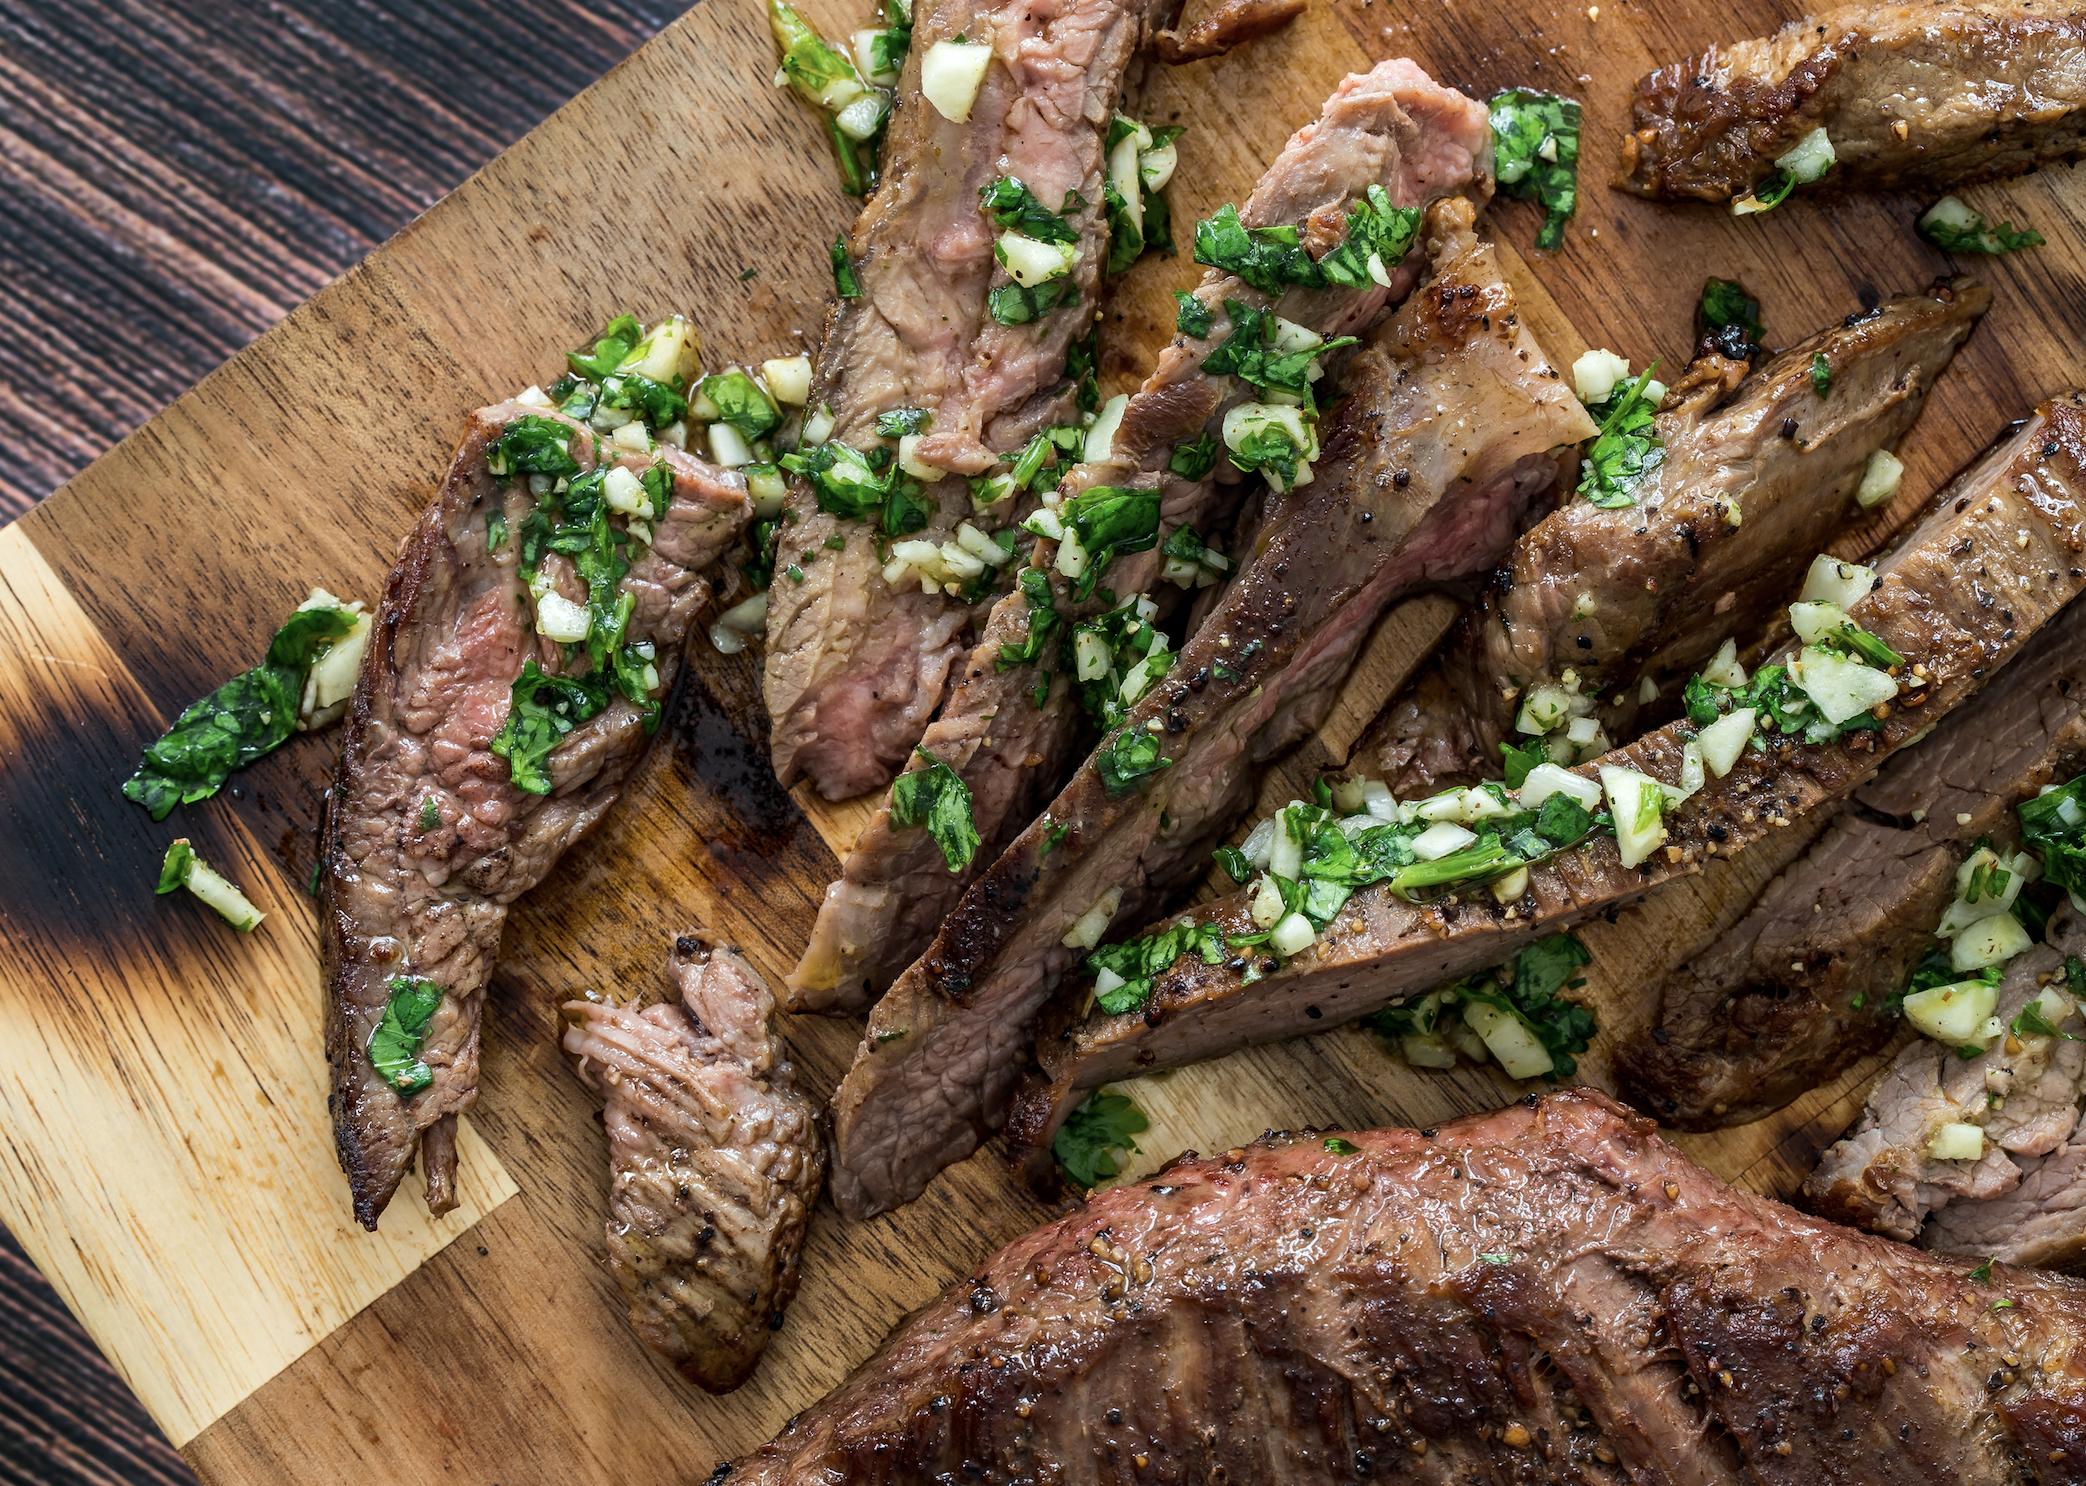  Who needs a fancy restaurant when you can make this steak at home?